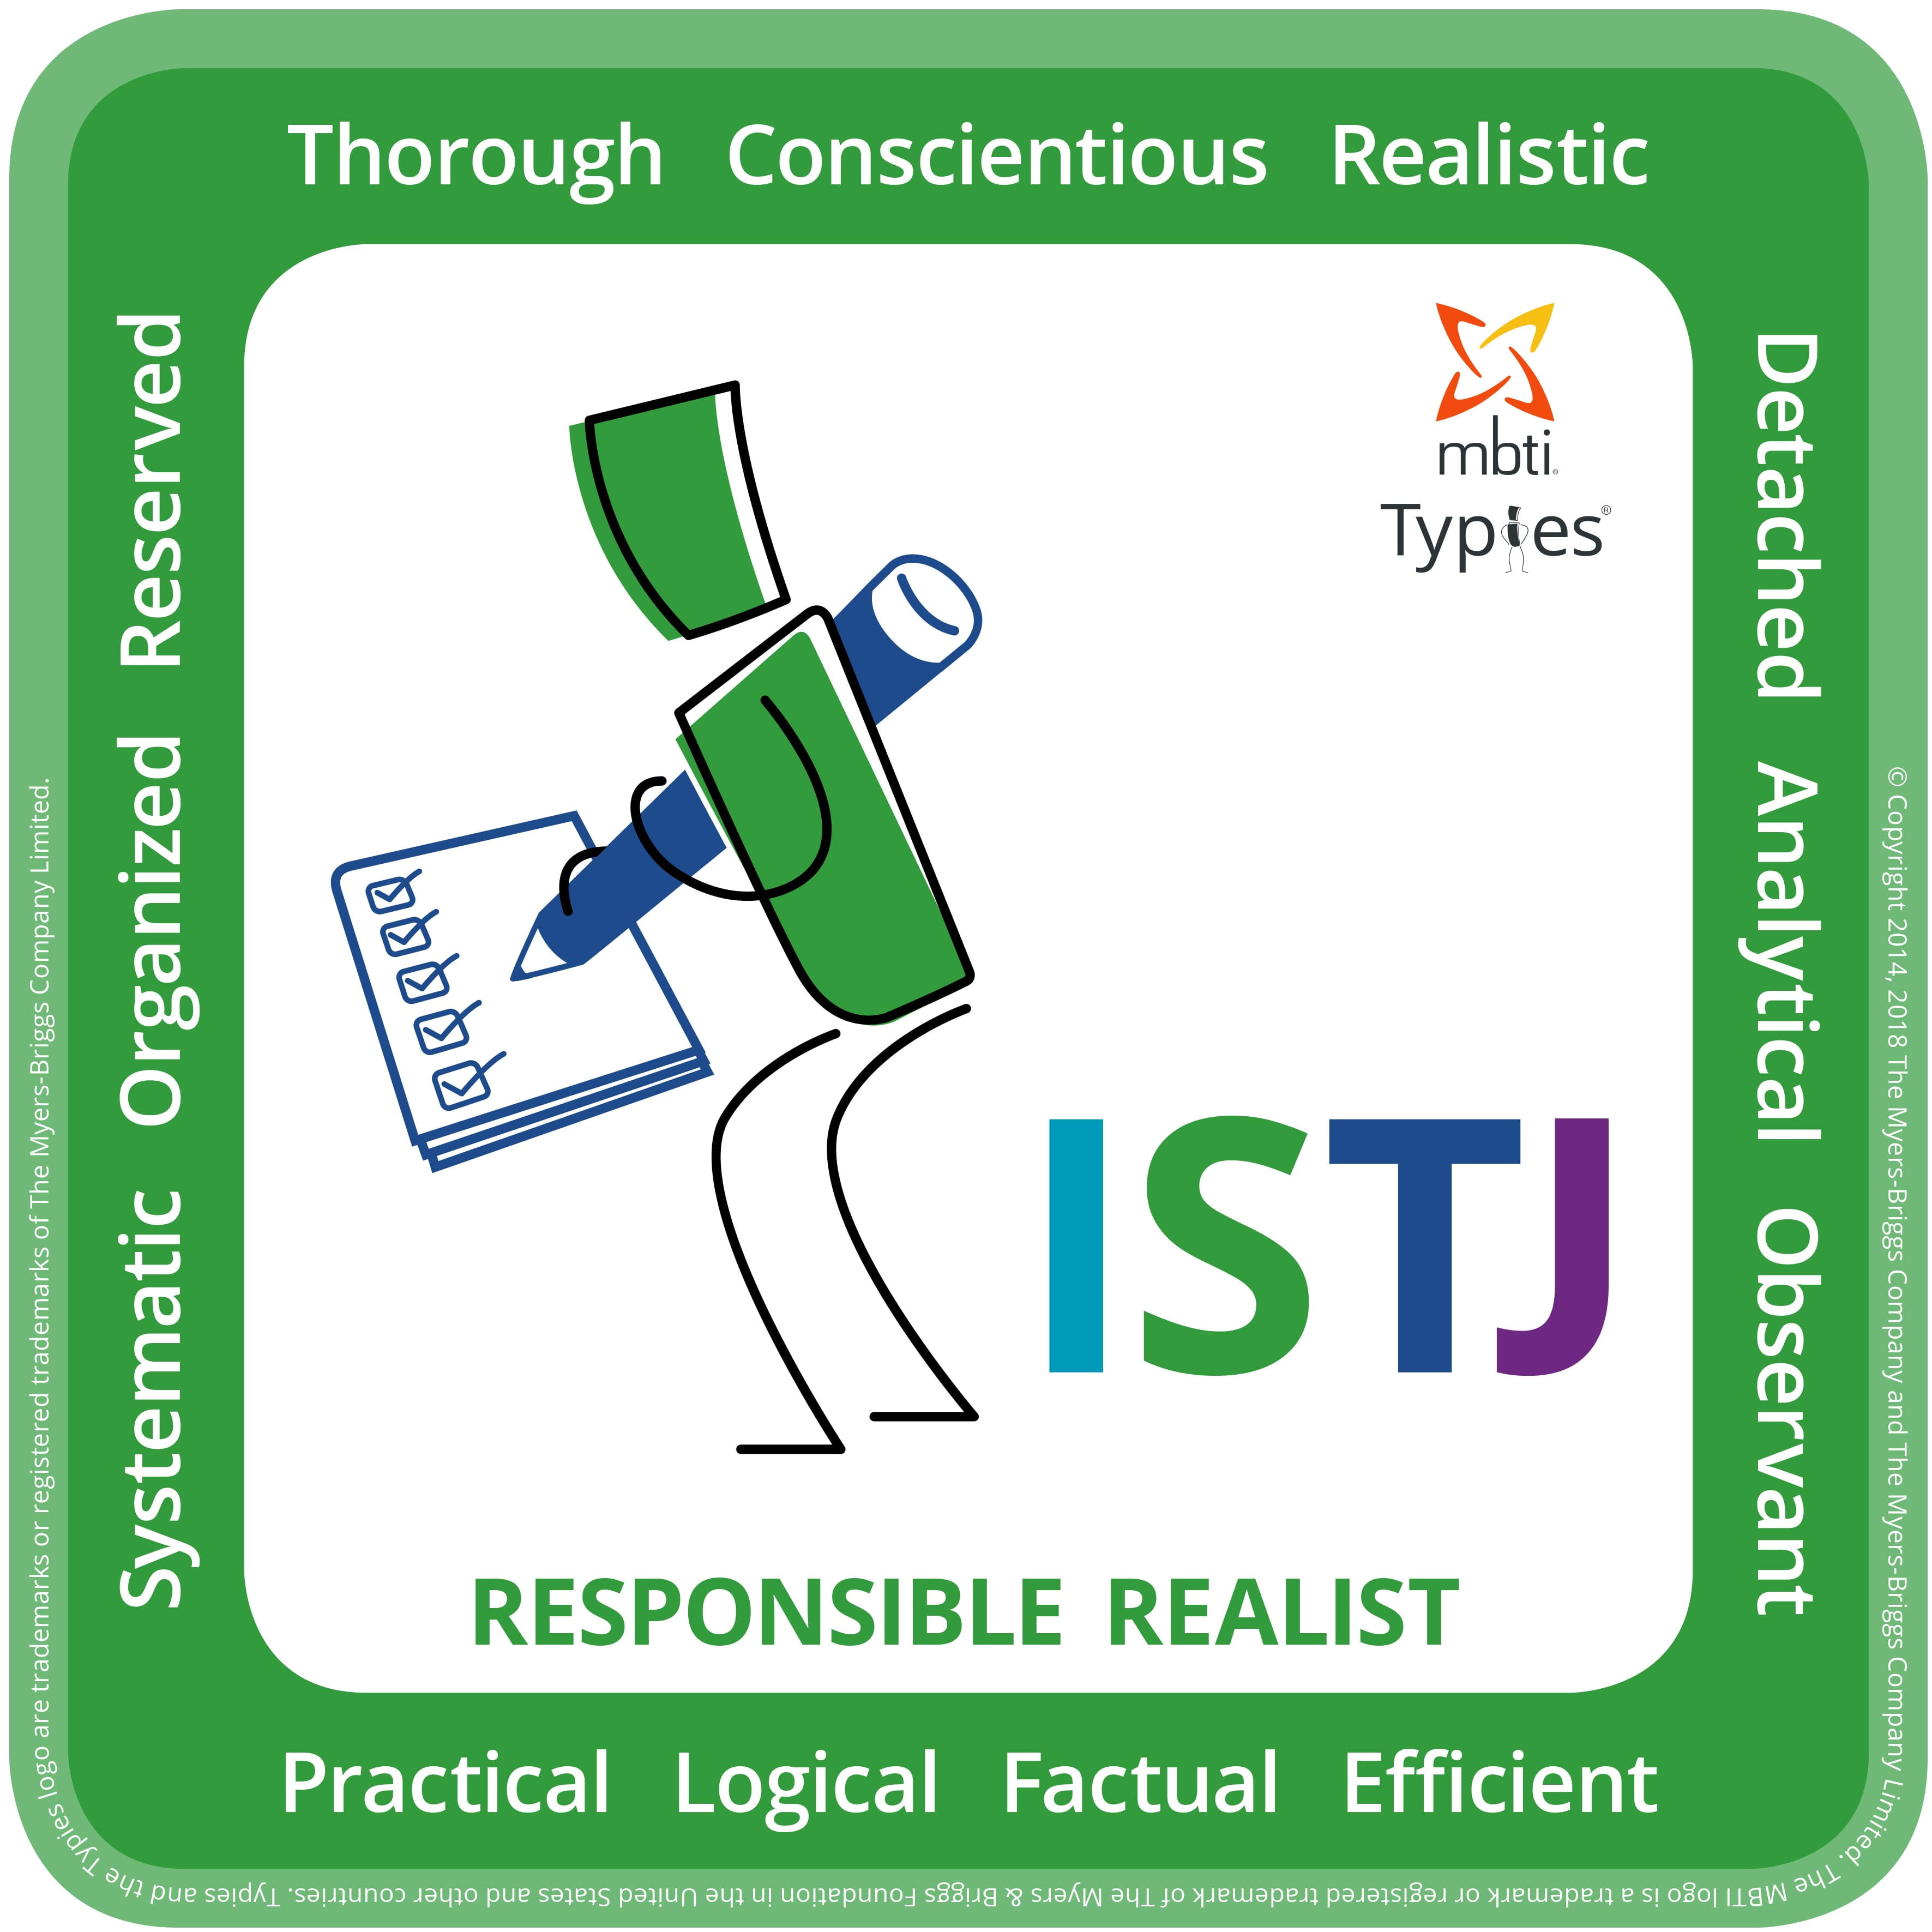 Contractor (Oath) MBTI Personality Type: ISTJ or ISTP?